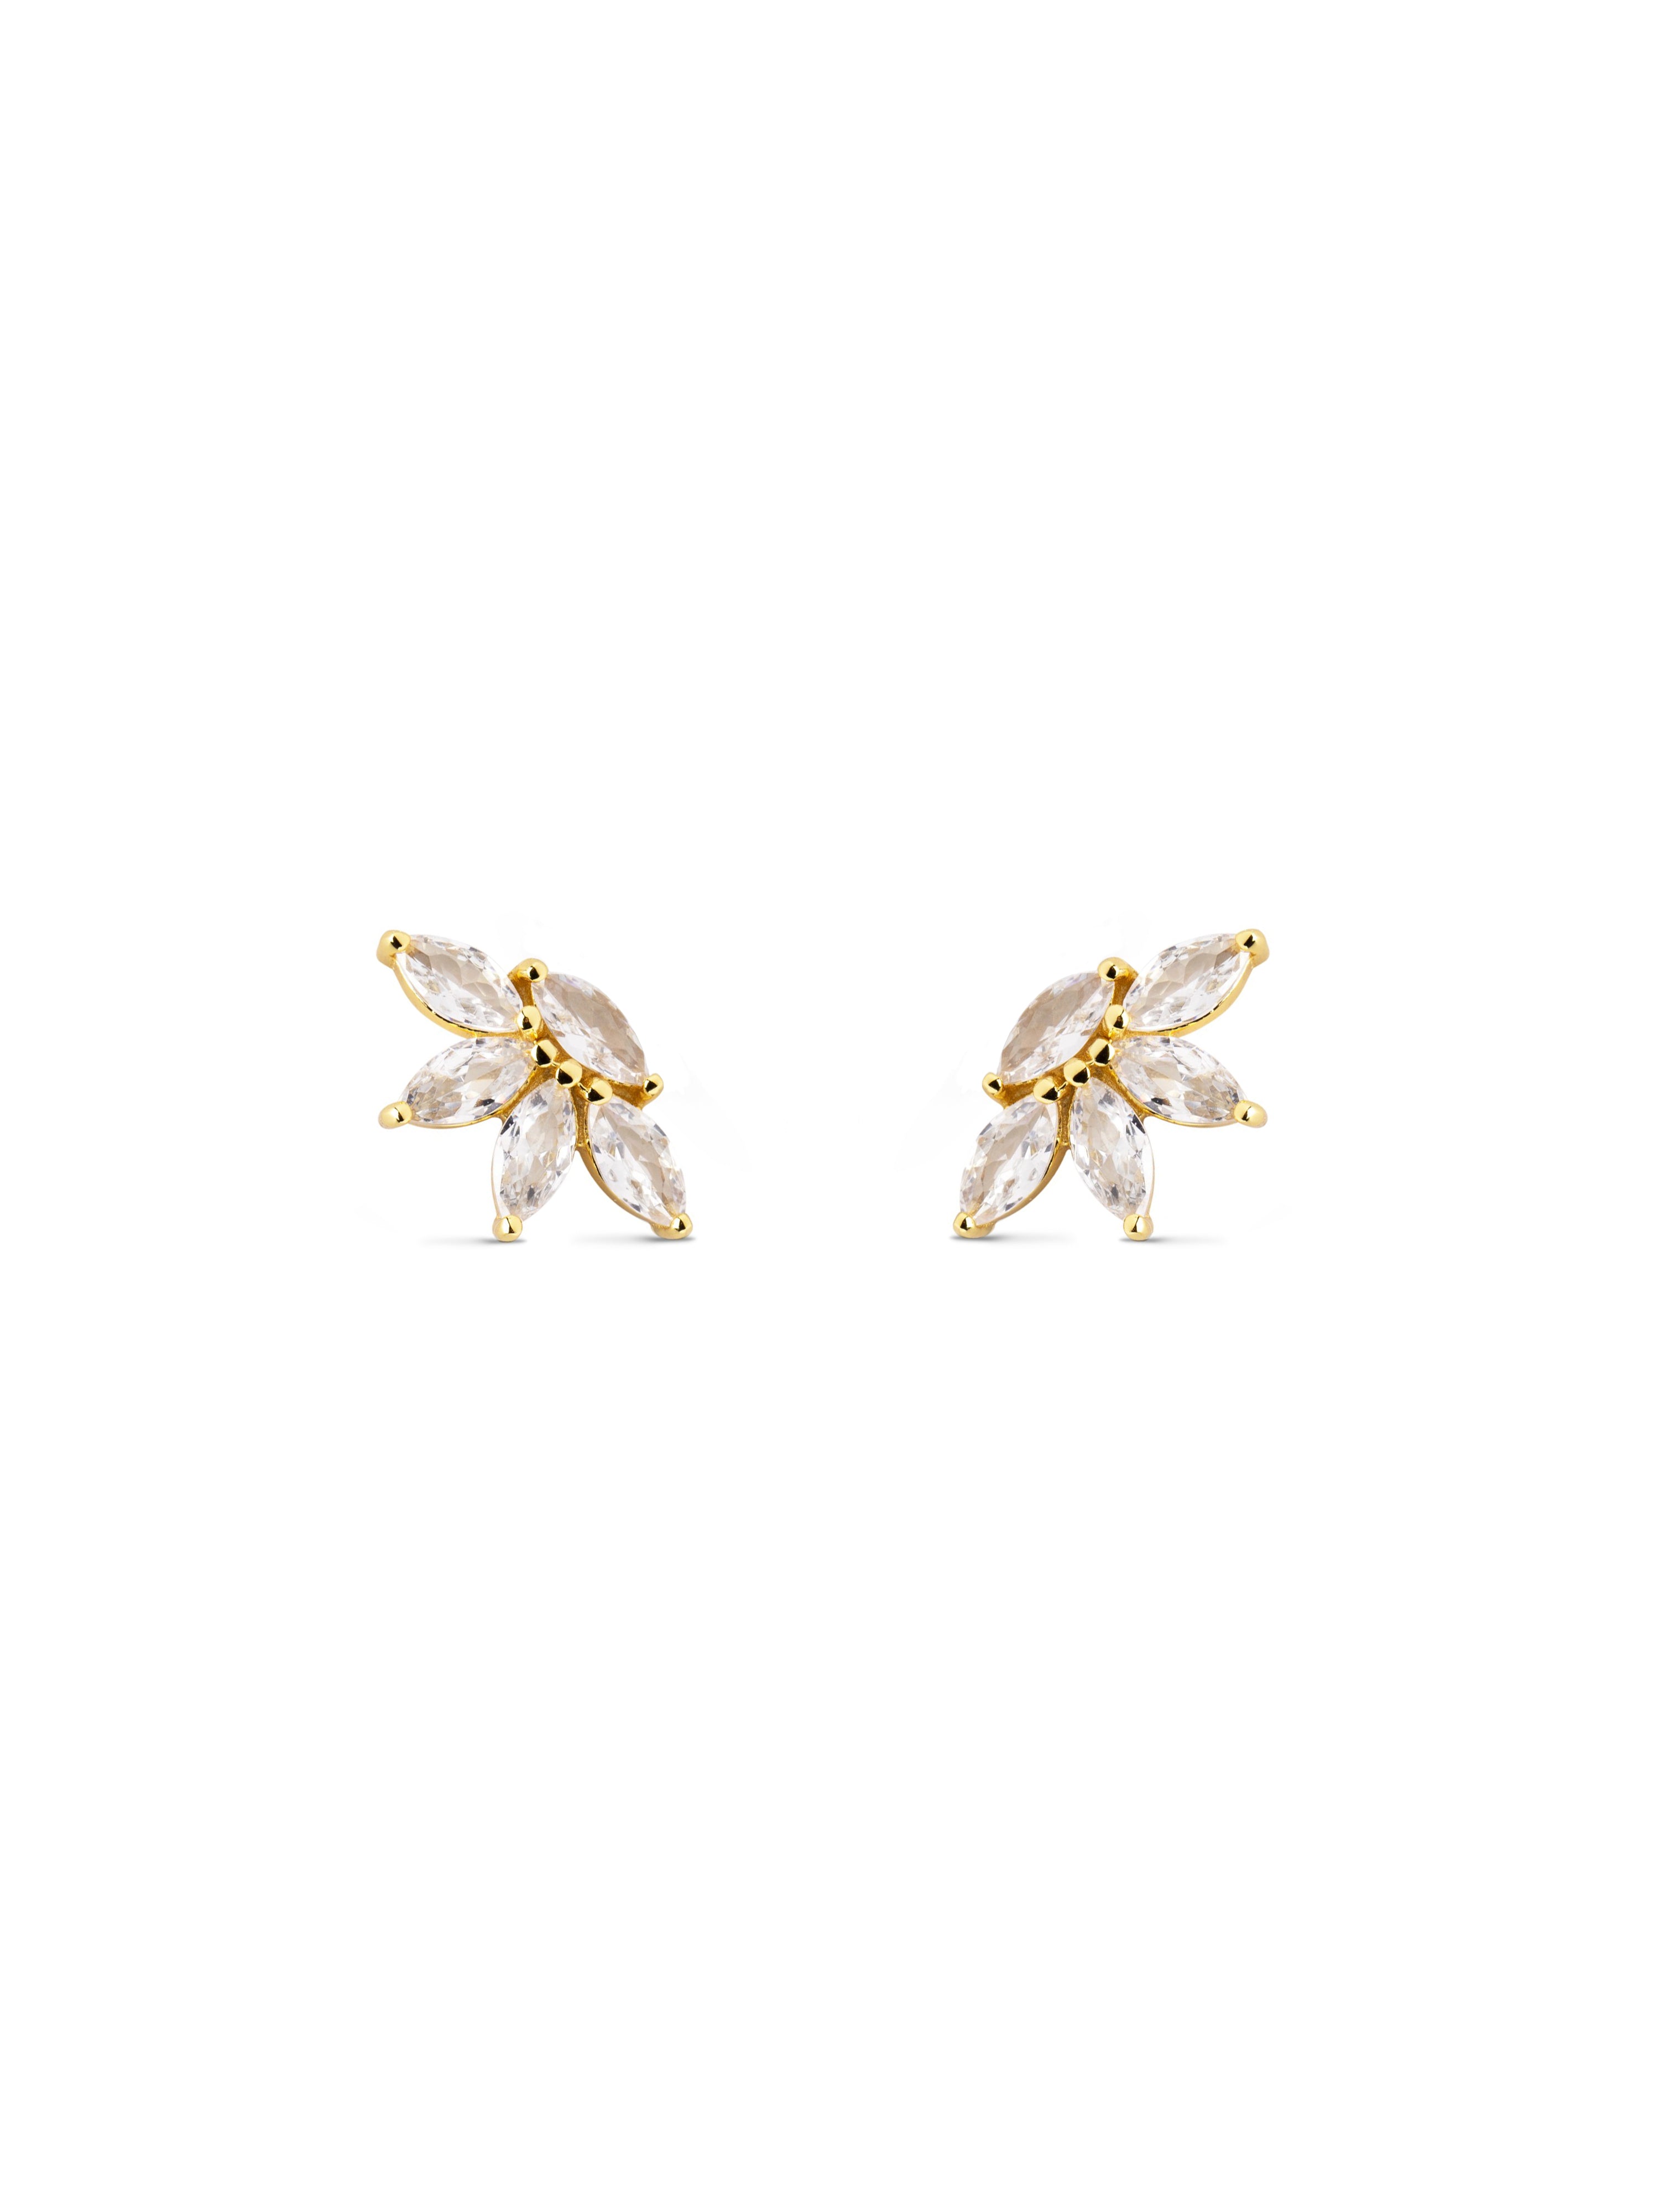 Miss Marquise Gold Earrings